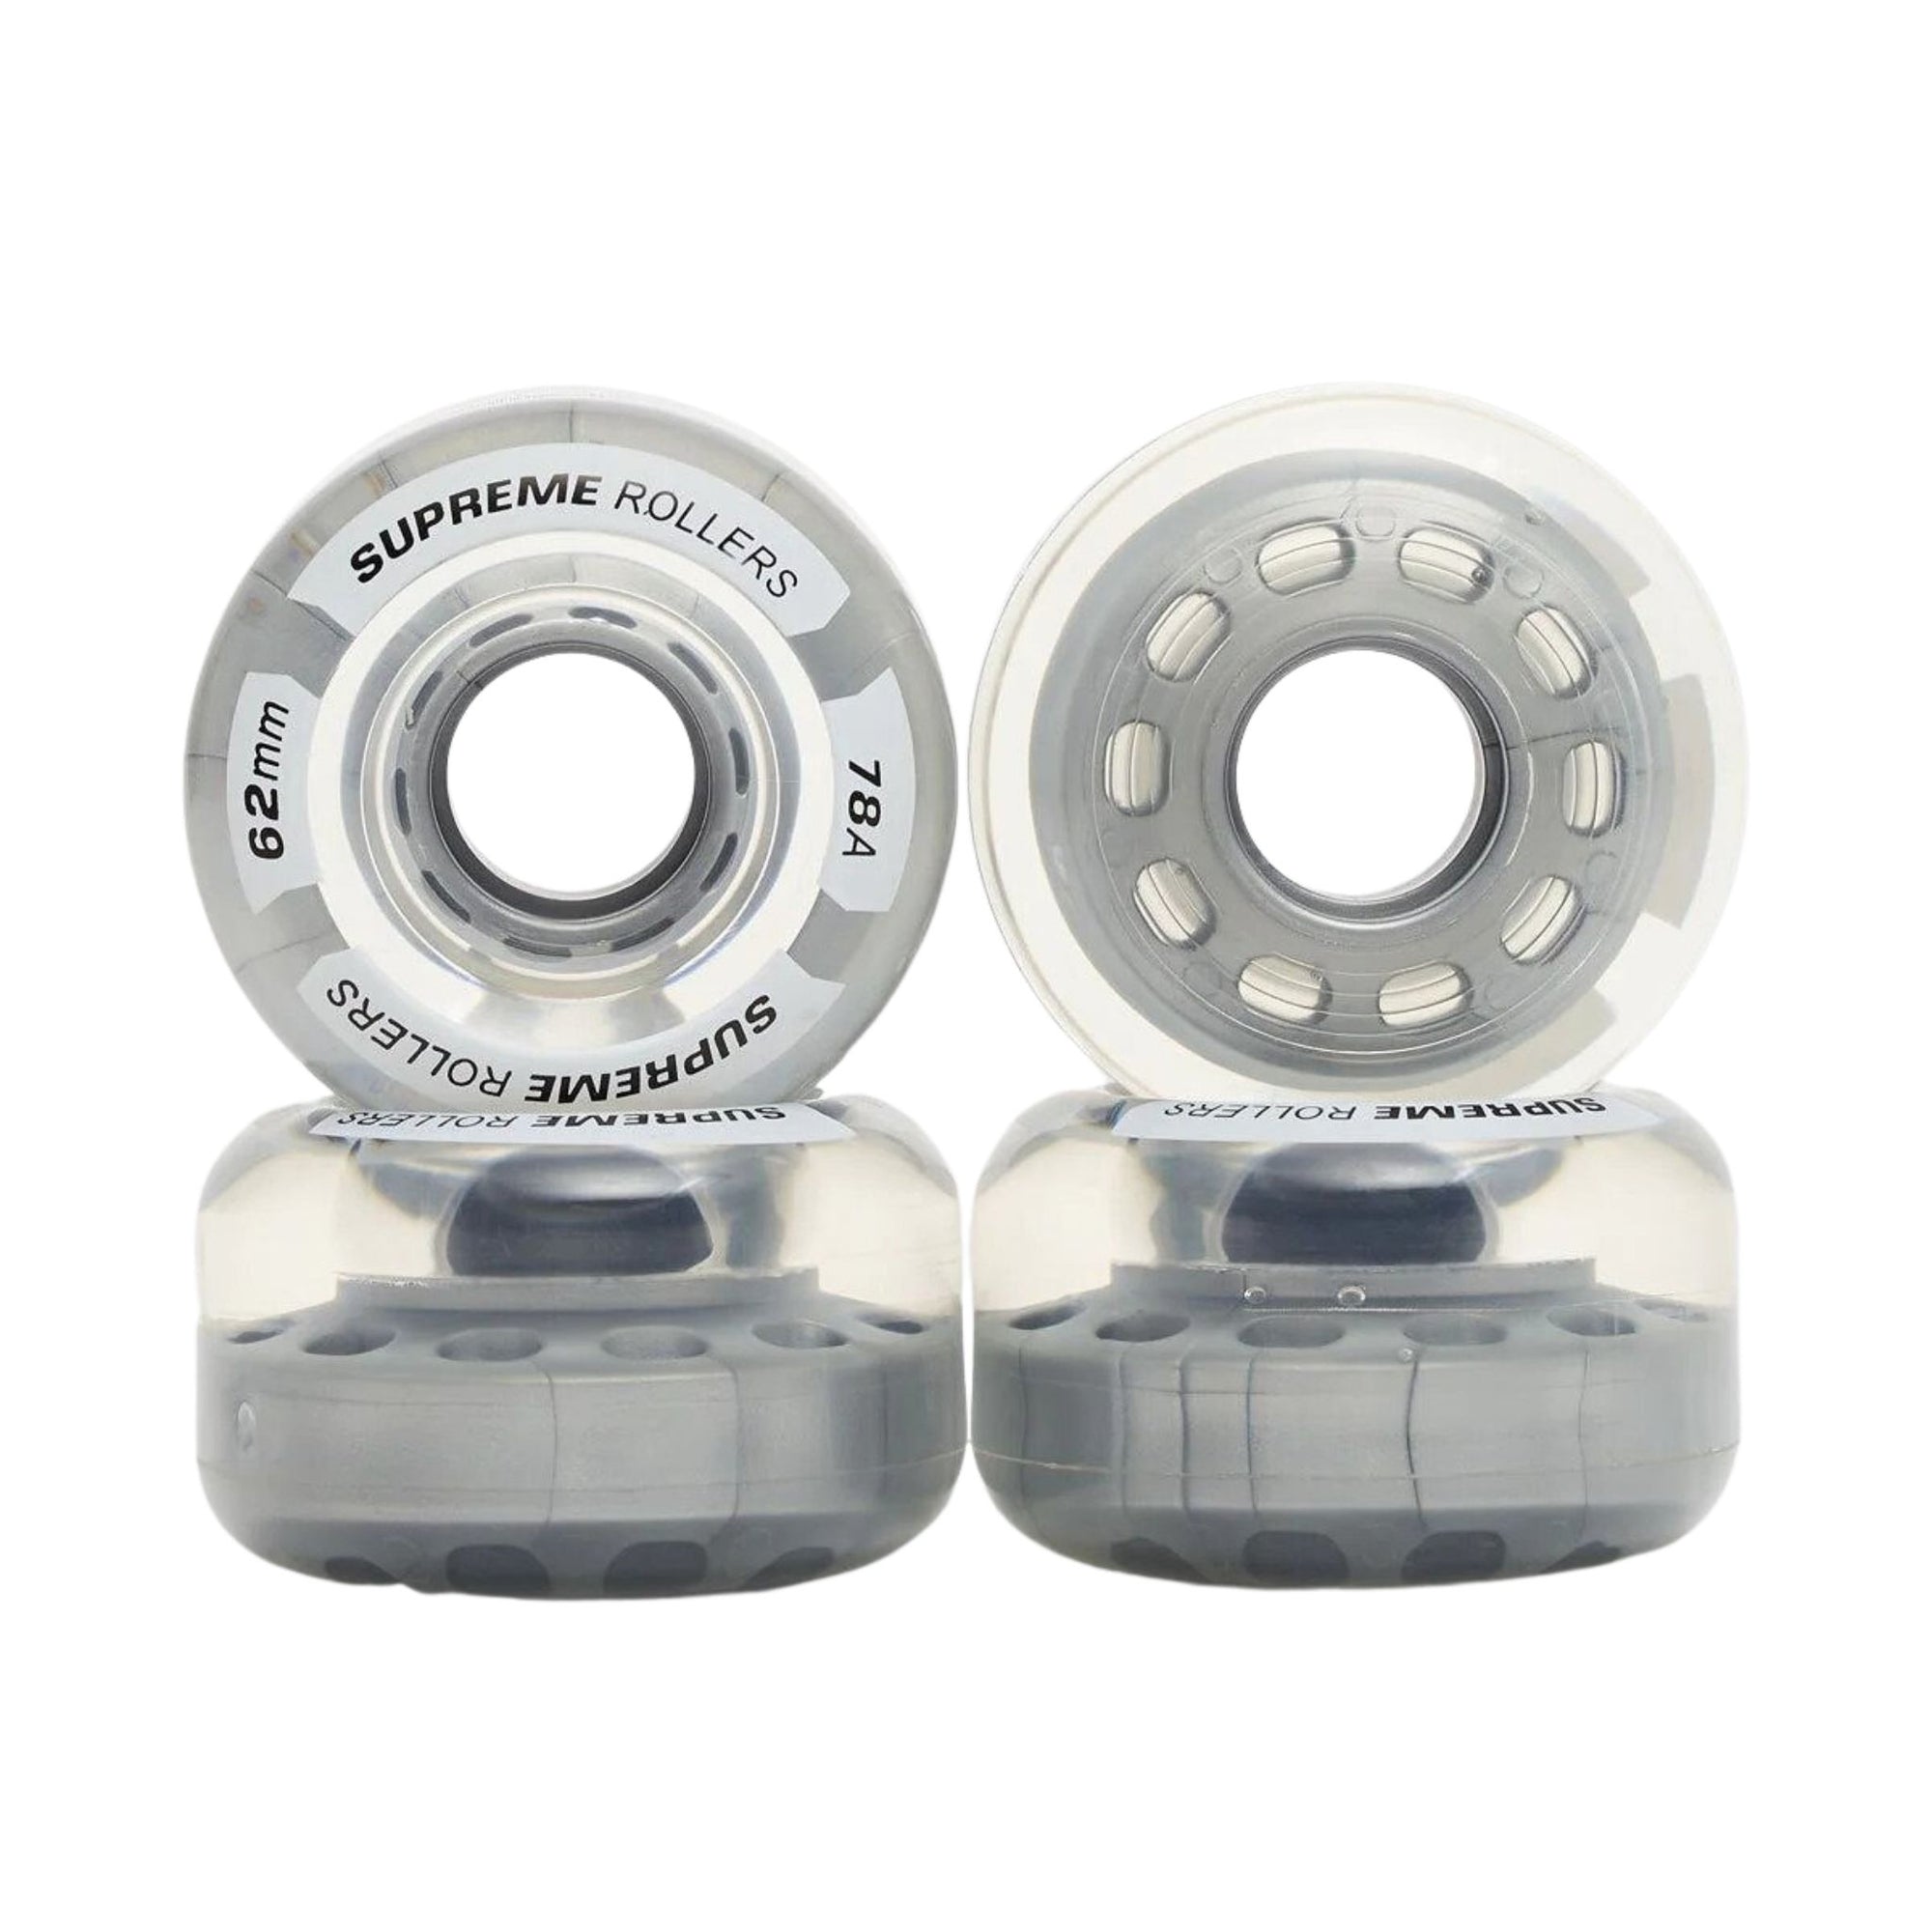 Supreme Rollers Quad Wheels 62mm/78A- Set of 4 -Roller Skates Parts and Accessories | JT Skate